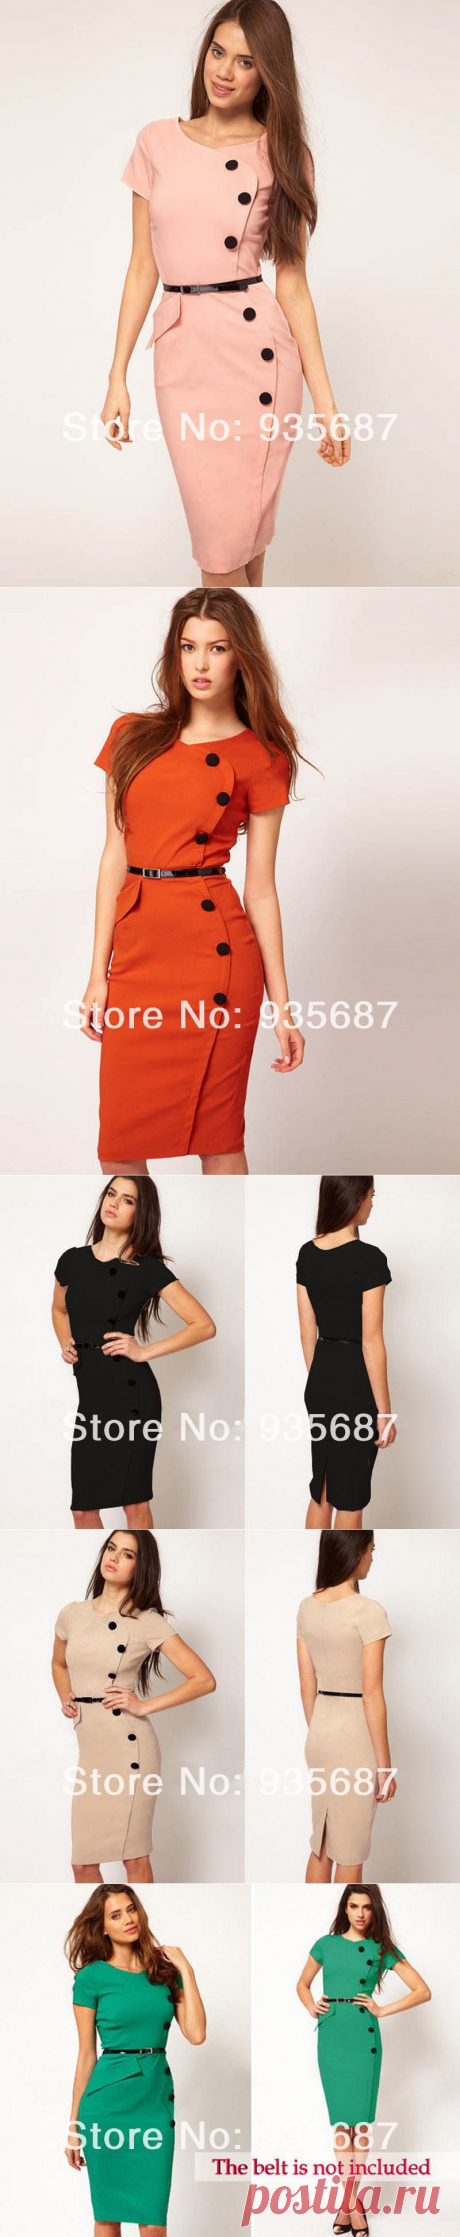 office chair seat cover Picture - More Detailed Picture about New 2014 women dress summer Work Wear Plus Size XXXL Button Short Sleeve Elegant Knee Length Stretch Bodycon Office Dress Picture in Dresses from GROUP-BUYING_Sell hot sales only | Aliexpress.com | Alibaba Group